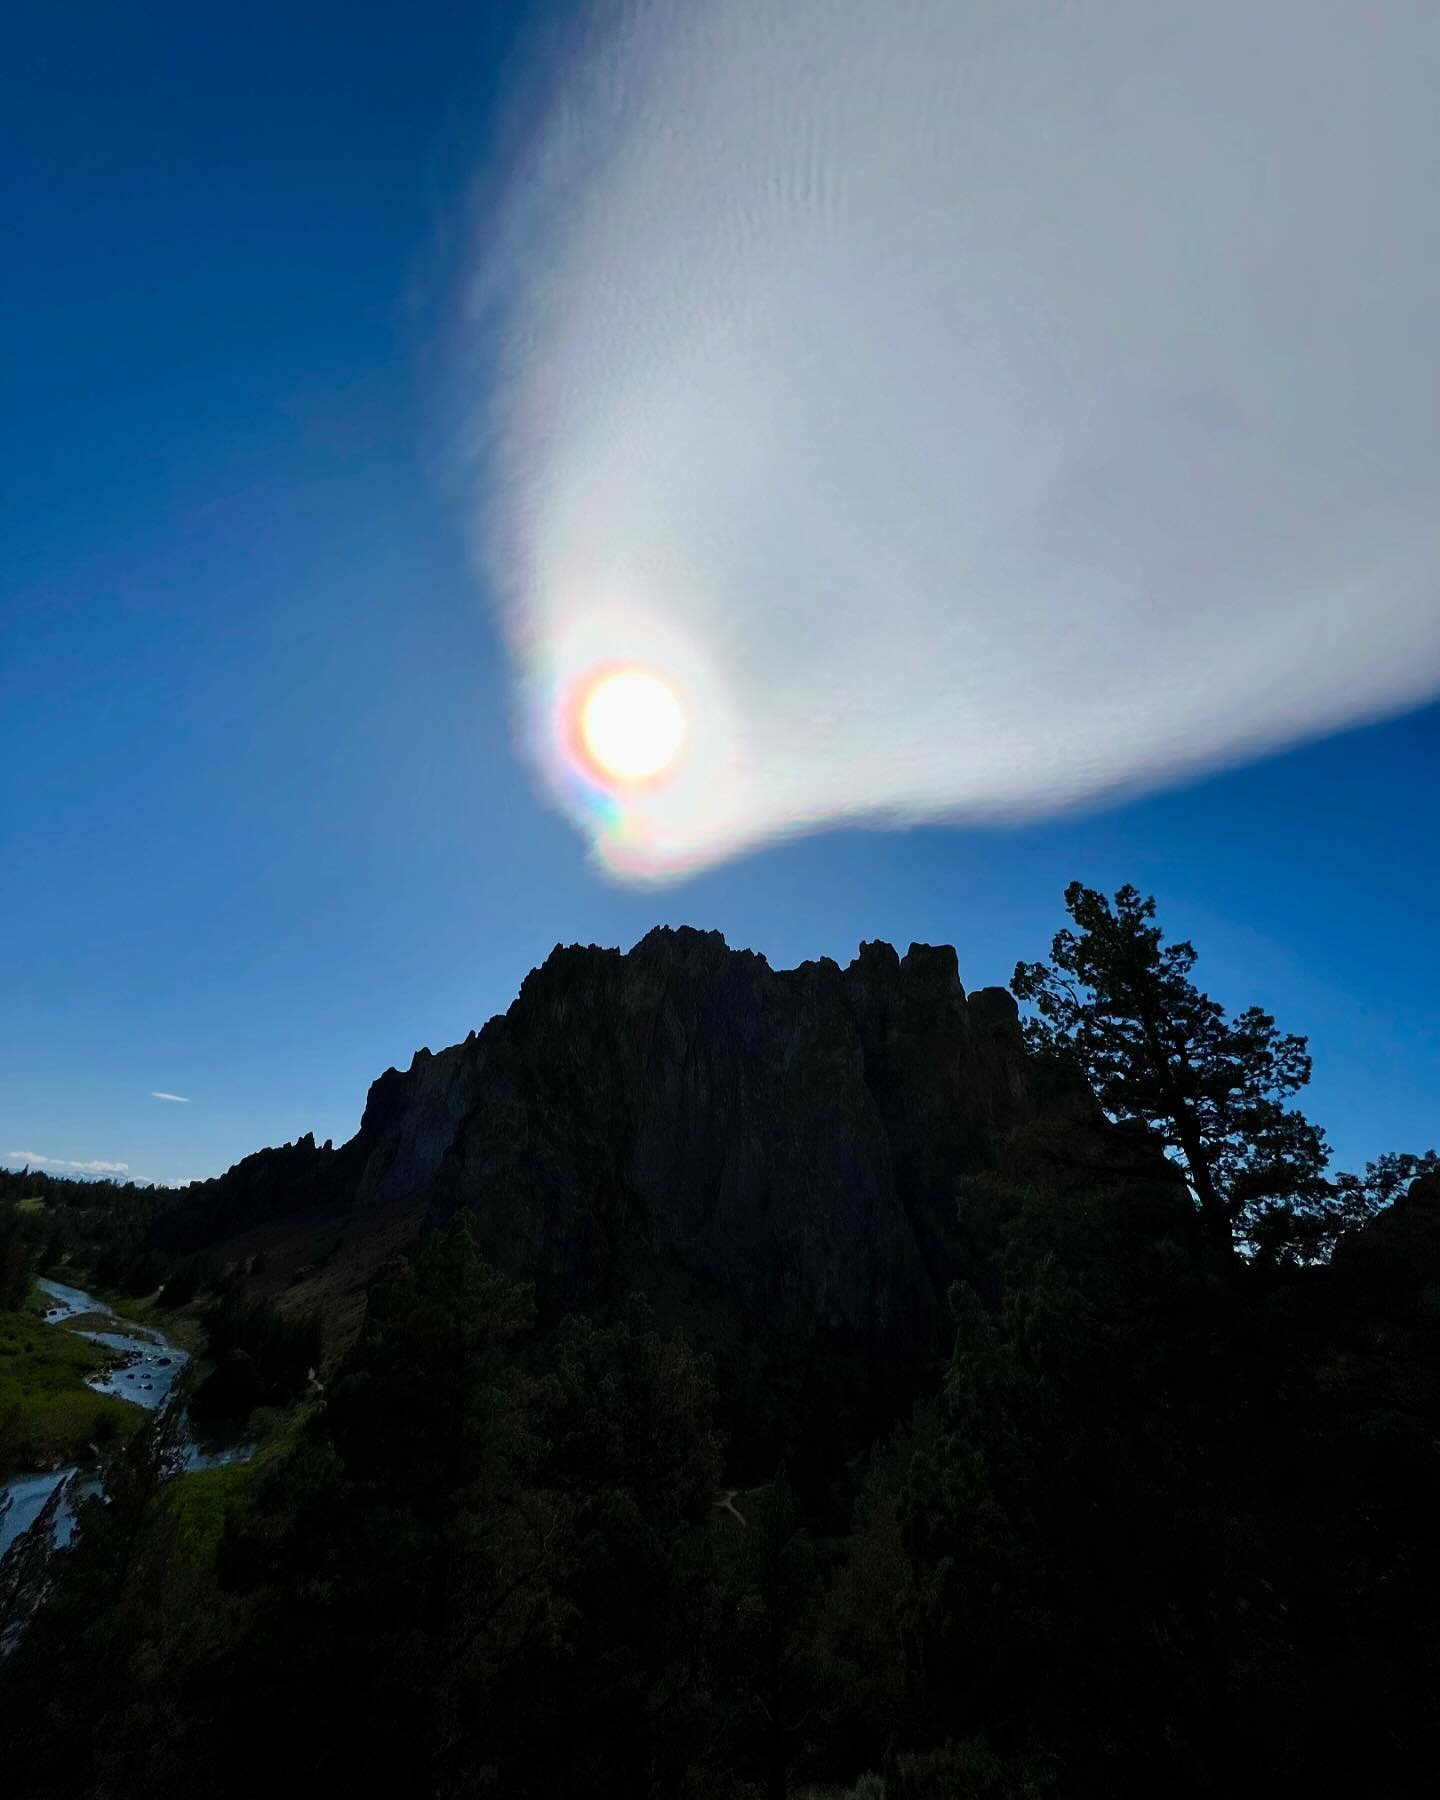 The wind blew itself out yesterday, making the sun look like a comet, leaving the mountains out for the most part today, as the weather heads for rain on Tuesday.  @smithrockpark 
.
.
.
#may #mayincentraloregon #stormiscoming #smithrock #smithrocksta